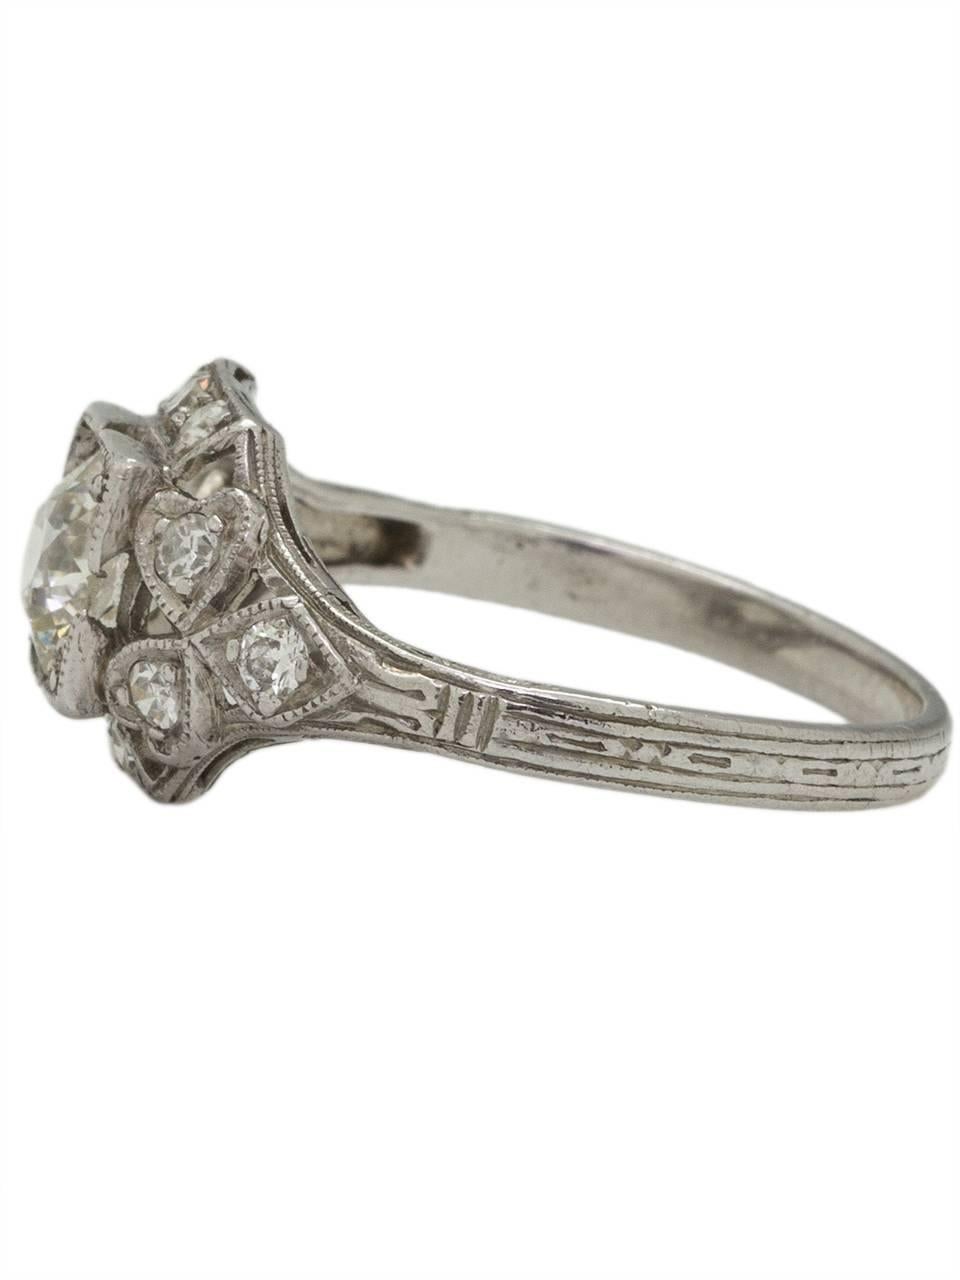 This stunning 1930s Art Deco platinum engagement ring showcases a very bright and lively EGL certified 0.75ct Old European Cut diamond, I/SI1. Twelve bead-set side diamonds which equal approximately 0.30ct are surrounded by a finely executed